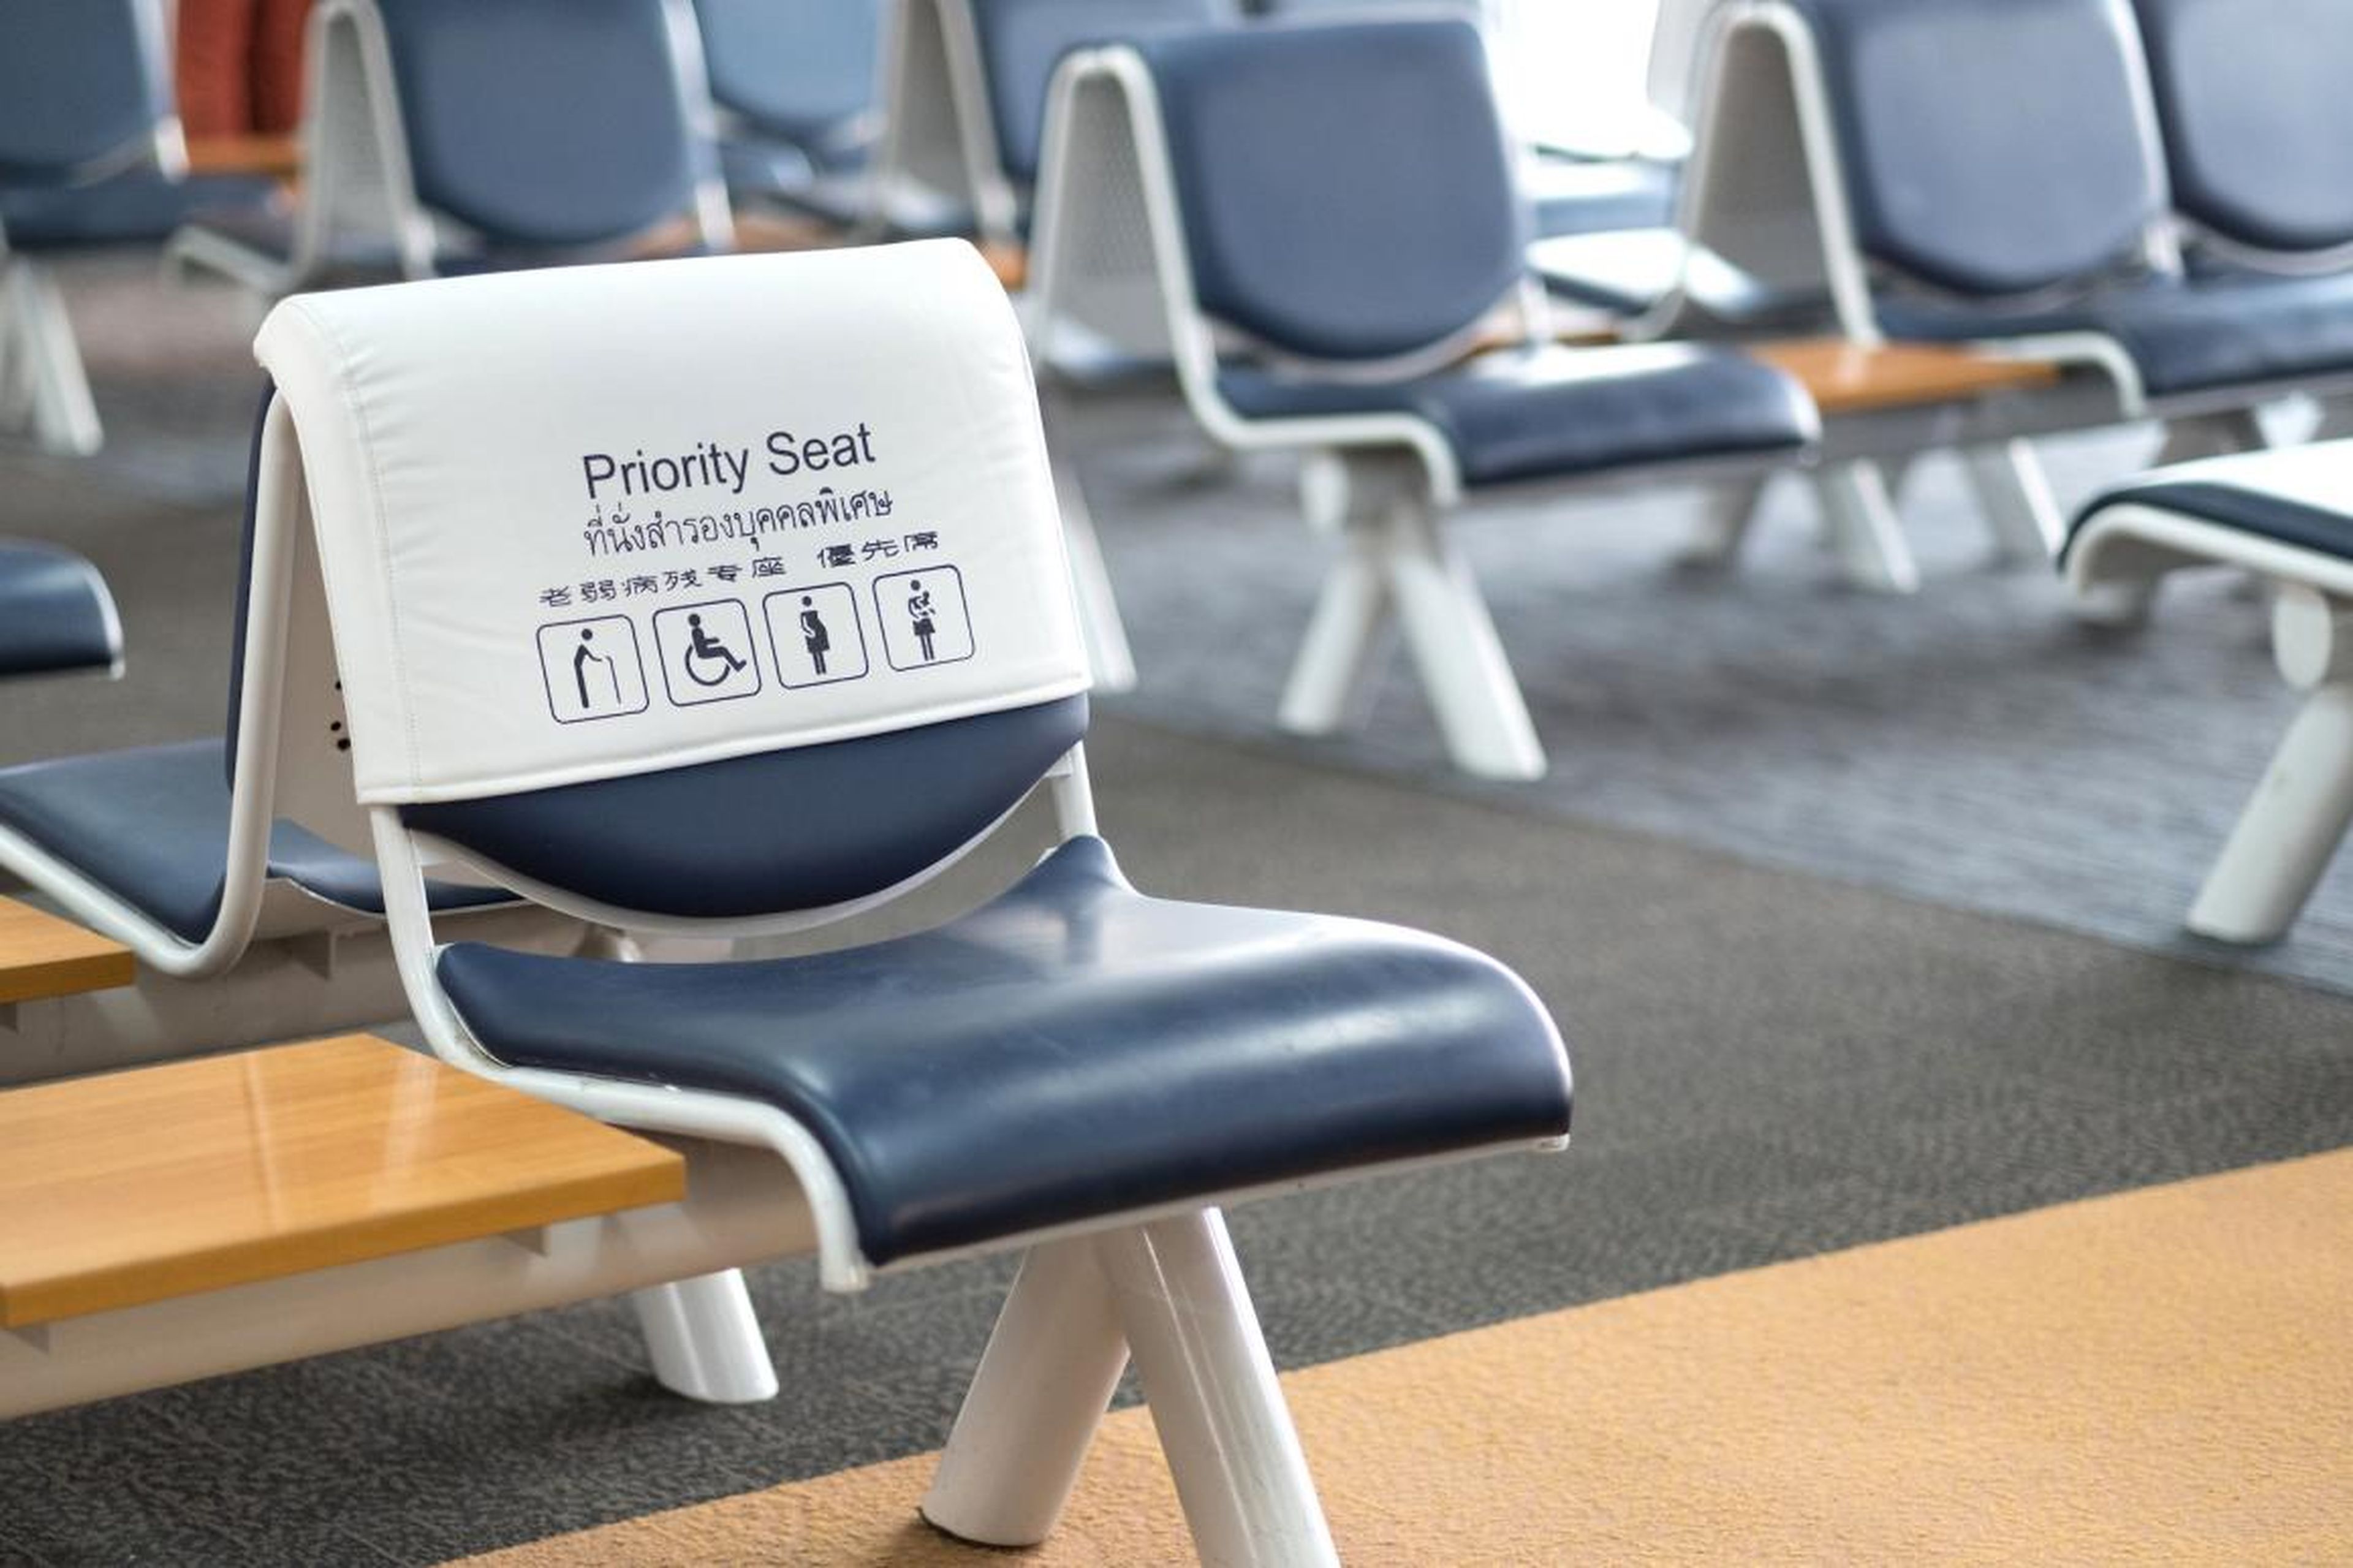 A priority seat for elderly, disabled, or pregnant people in an airport.